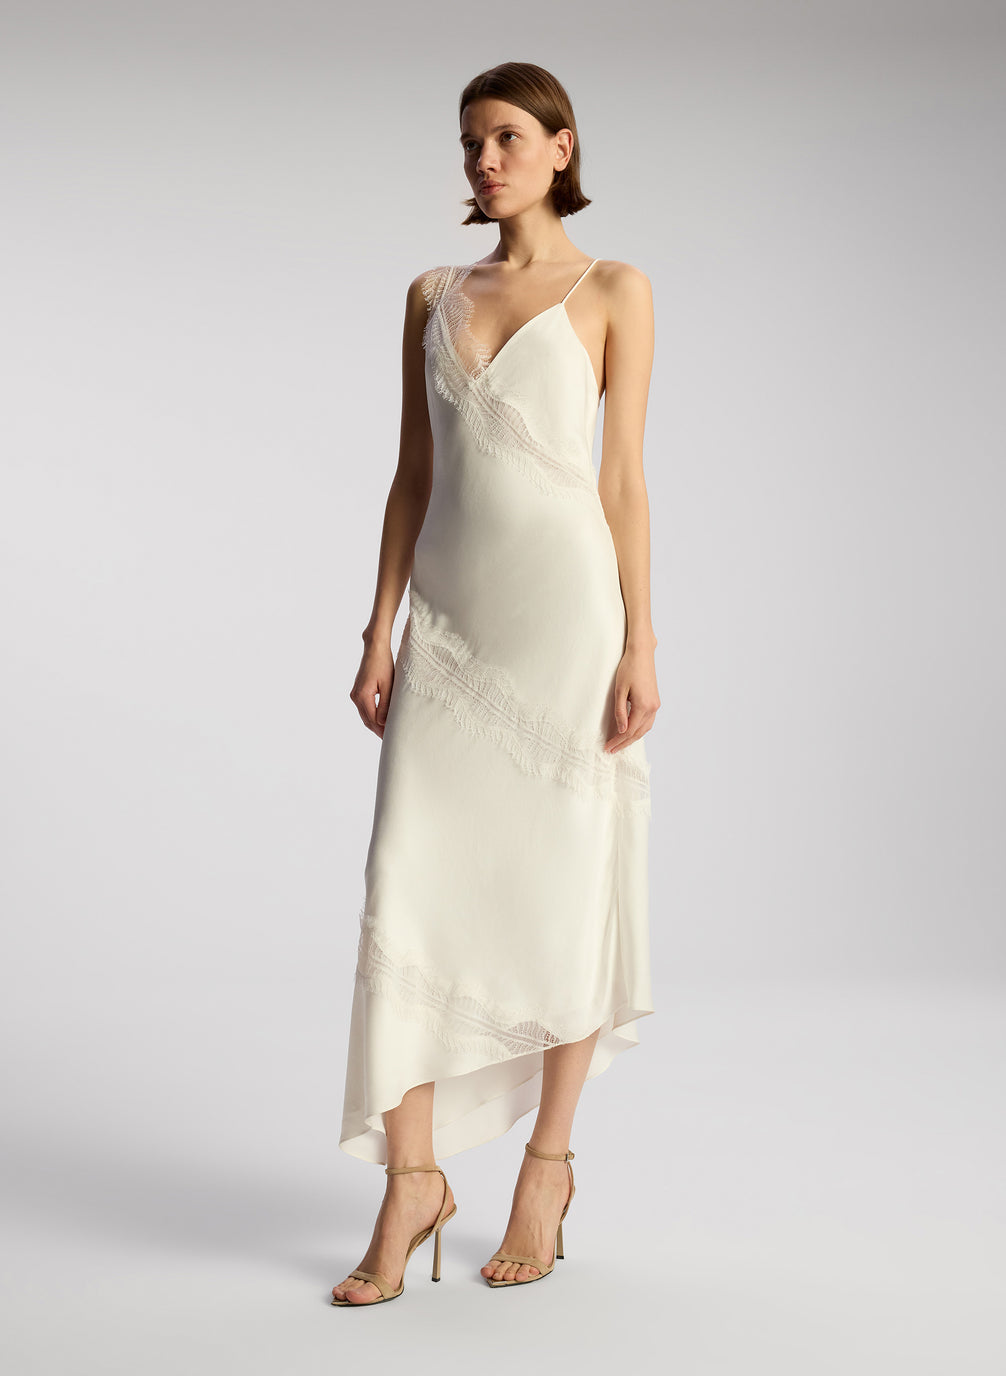 side view of woman wearing off white lace trimmed midi dress